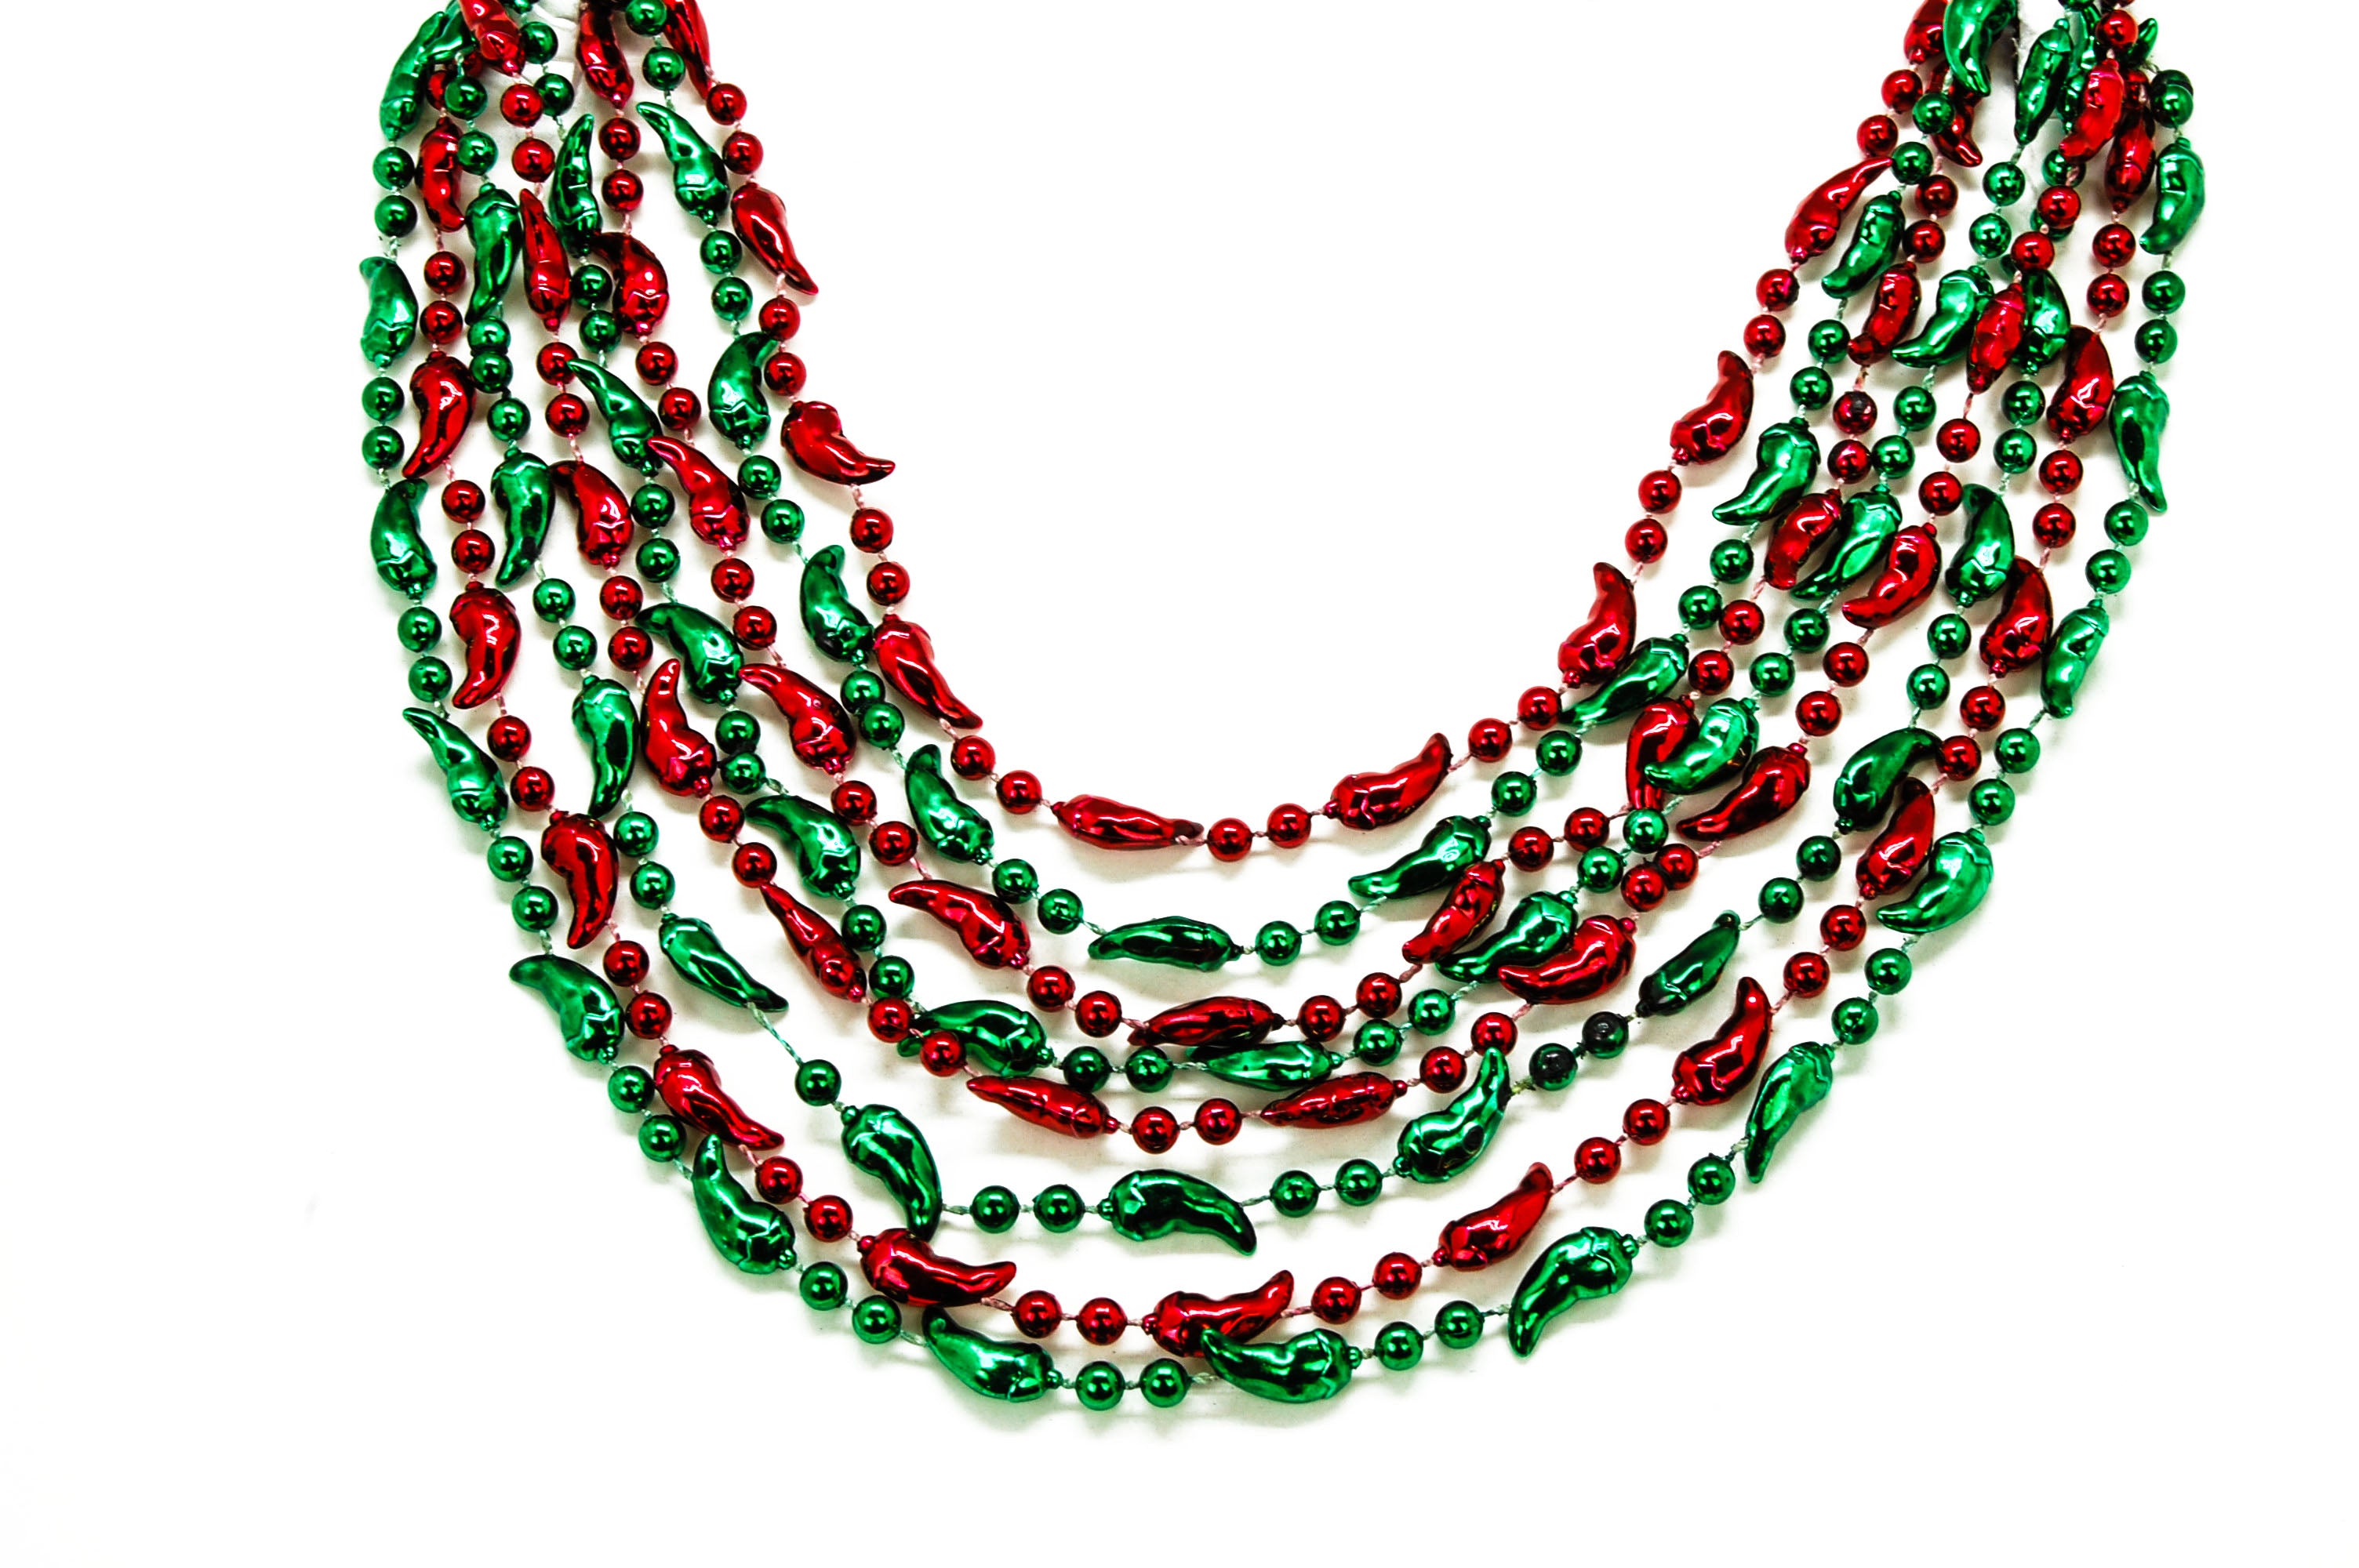 36" Red and Green Chili Pepper Beads